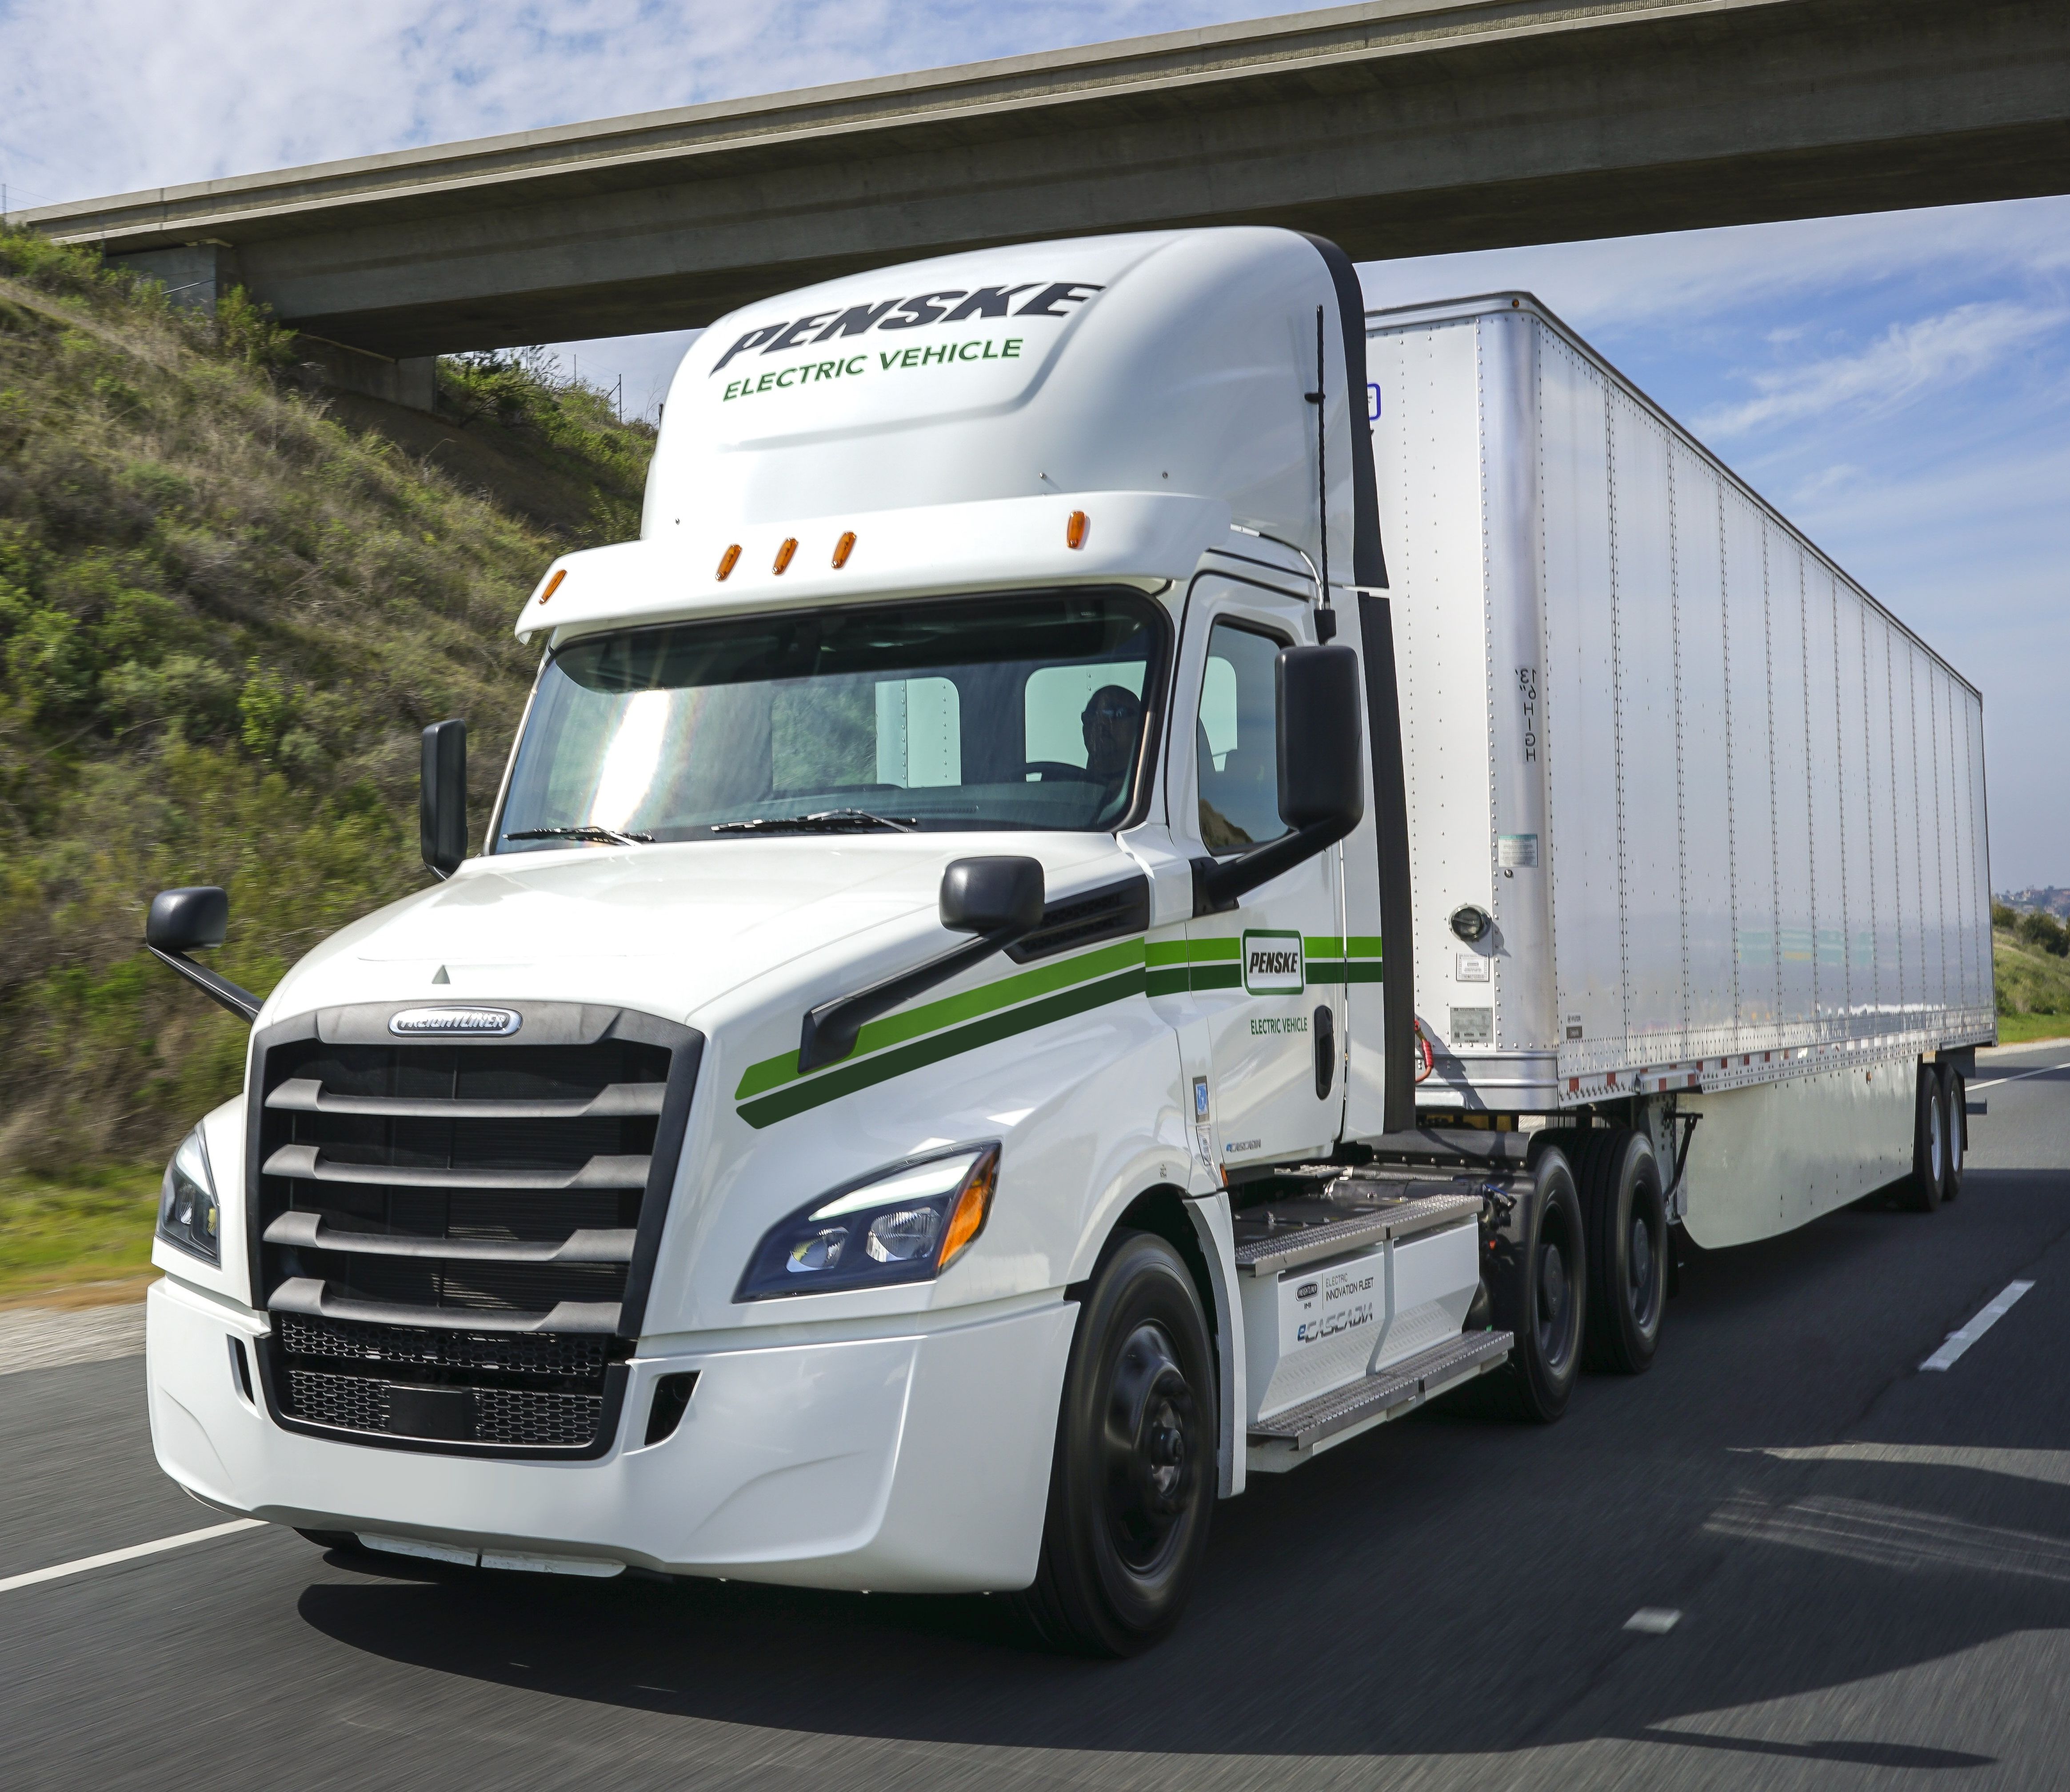 In the fourth annual State of Sustainable Fleets Market Brief, commercial transportation fleets continue to report a resounding trend — their use of clean fuels and advanced vehicle technologies is rapidly accelerating.